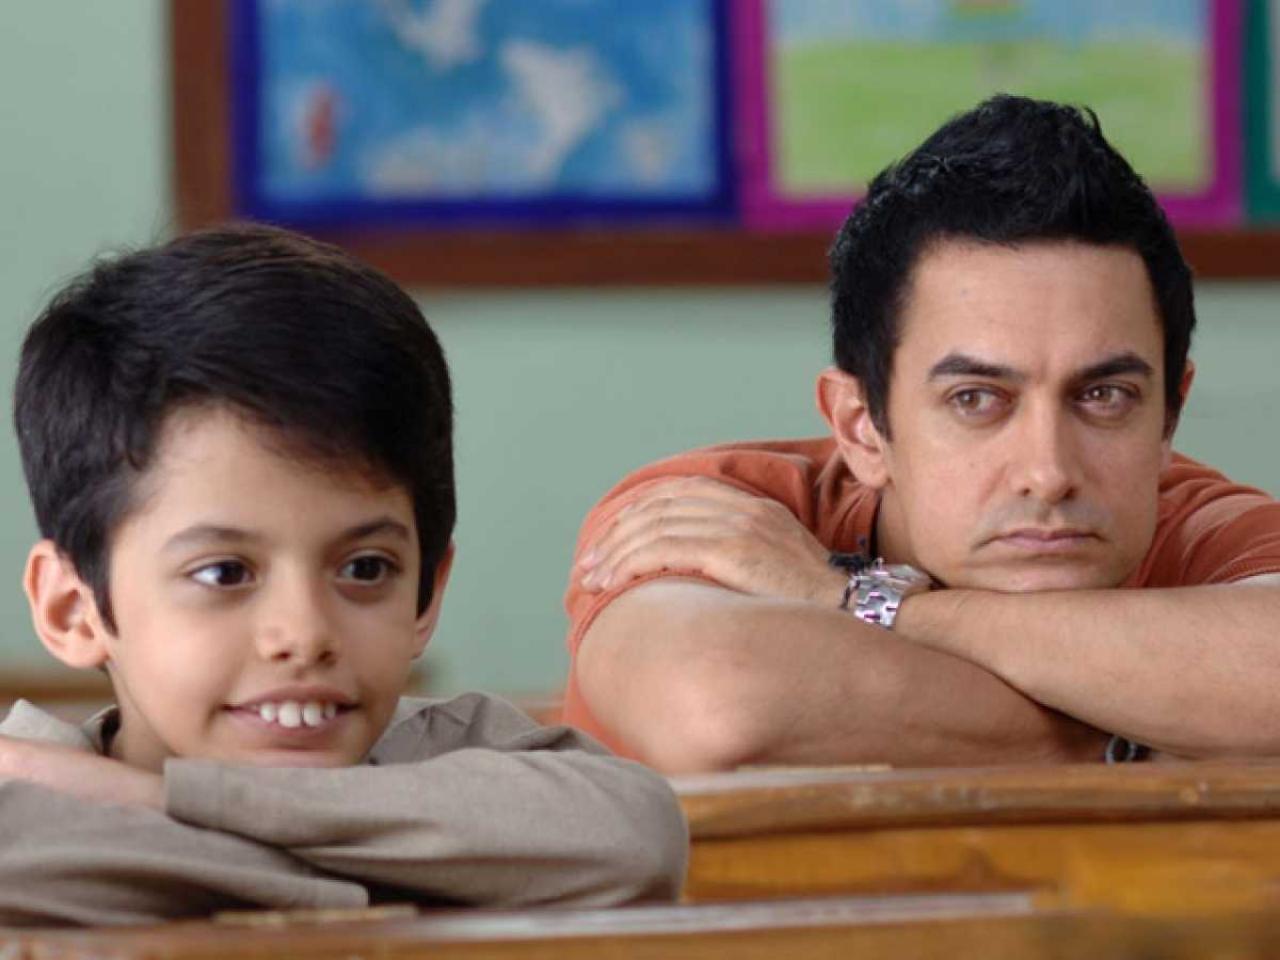 'Taare Zameen Par' (2007) tells the tale of a dyslexic child 'Ishaan' (Darsheel Safari) who is sent to a boarding school for his poor academic performance by his extremely critical parents. Ram (Aamir Khan), an art teacher, recognizes 'Ishaan''s struggle and helps him navigate his way through school. The film was directed by Aamir Khan and Amole Gupte.